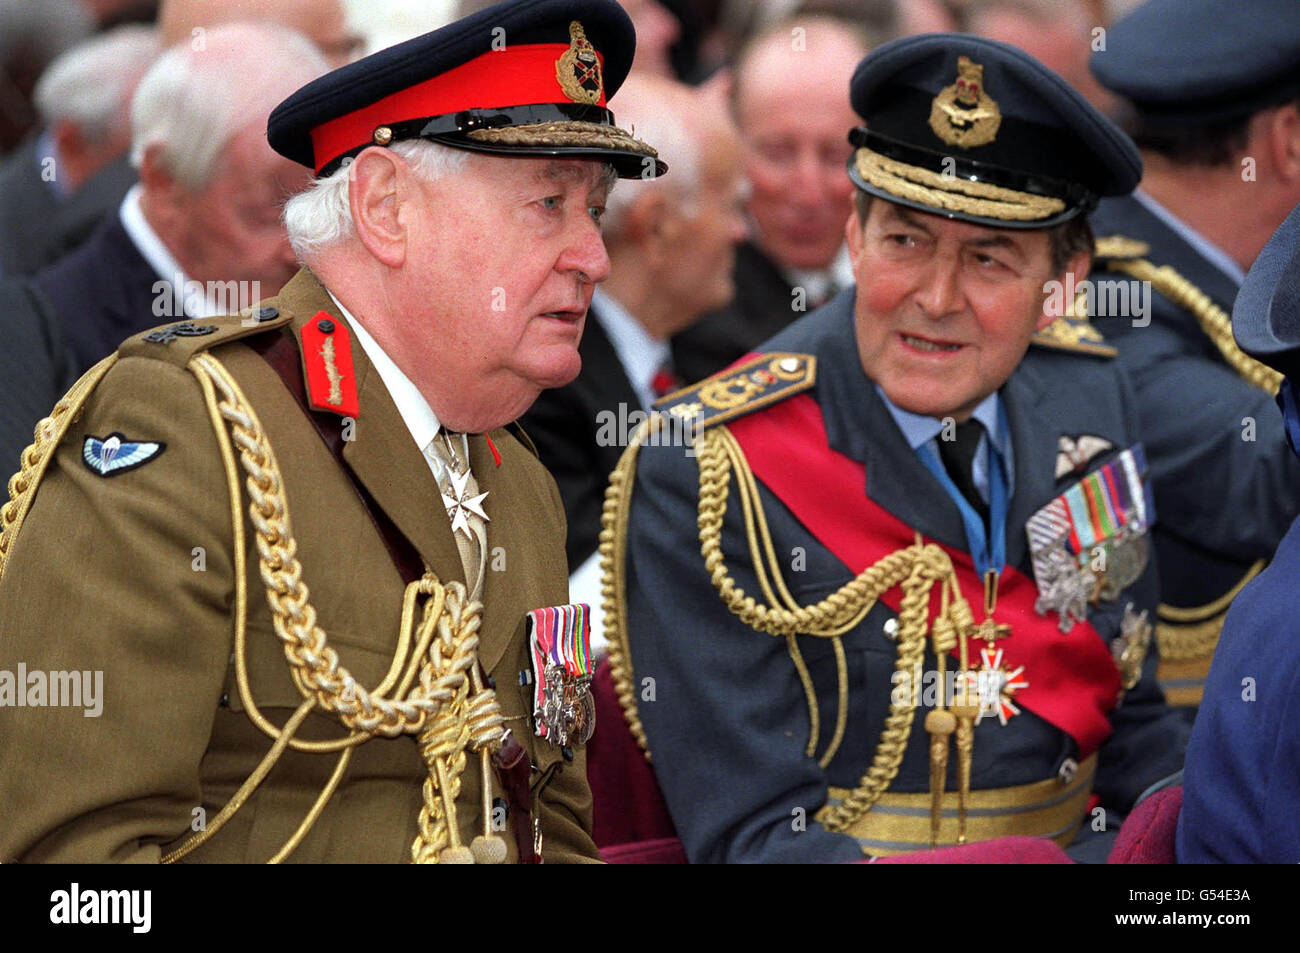 Field Marshal Lord Bramall (L) and Marshal of the Royal Air Force Sir Michael Beetham at the unveiling of the statue to Polish wartime leader Wladyslaw Sikorski, outside the Polish Embassy in London. * General Sikorski was the Prime Minister of Poland and Commander in Chief of its armed forces until he died in a plane crash off Gibralter in July 1943. Stock Photo